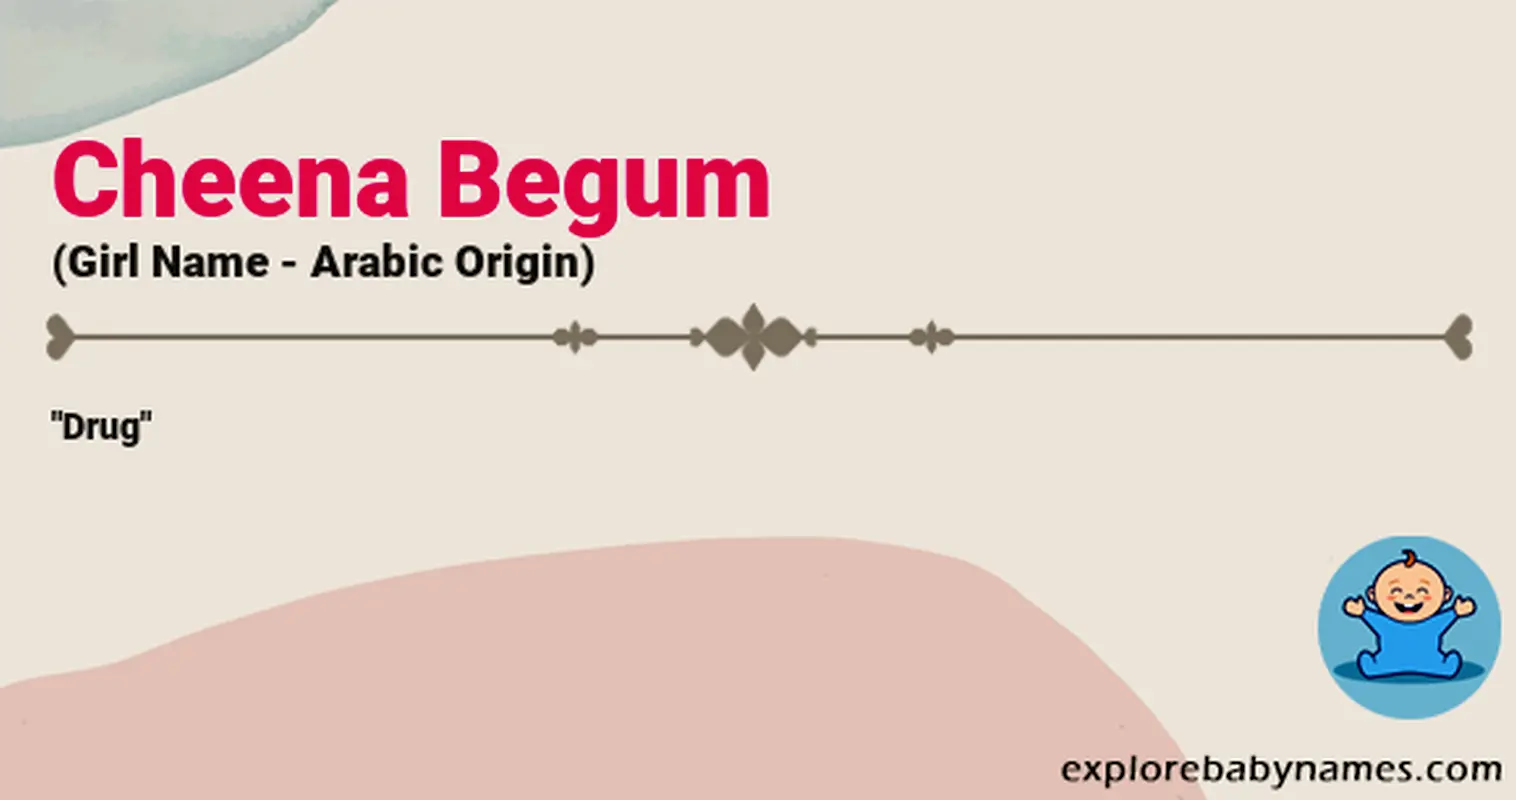 Meaning of Cheena Begum